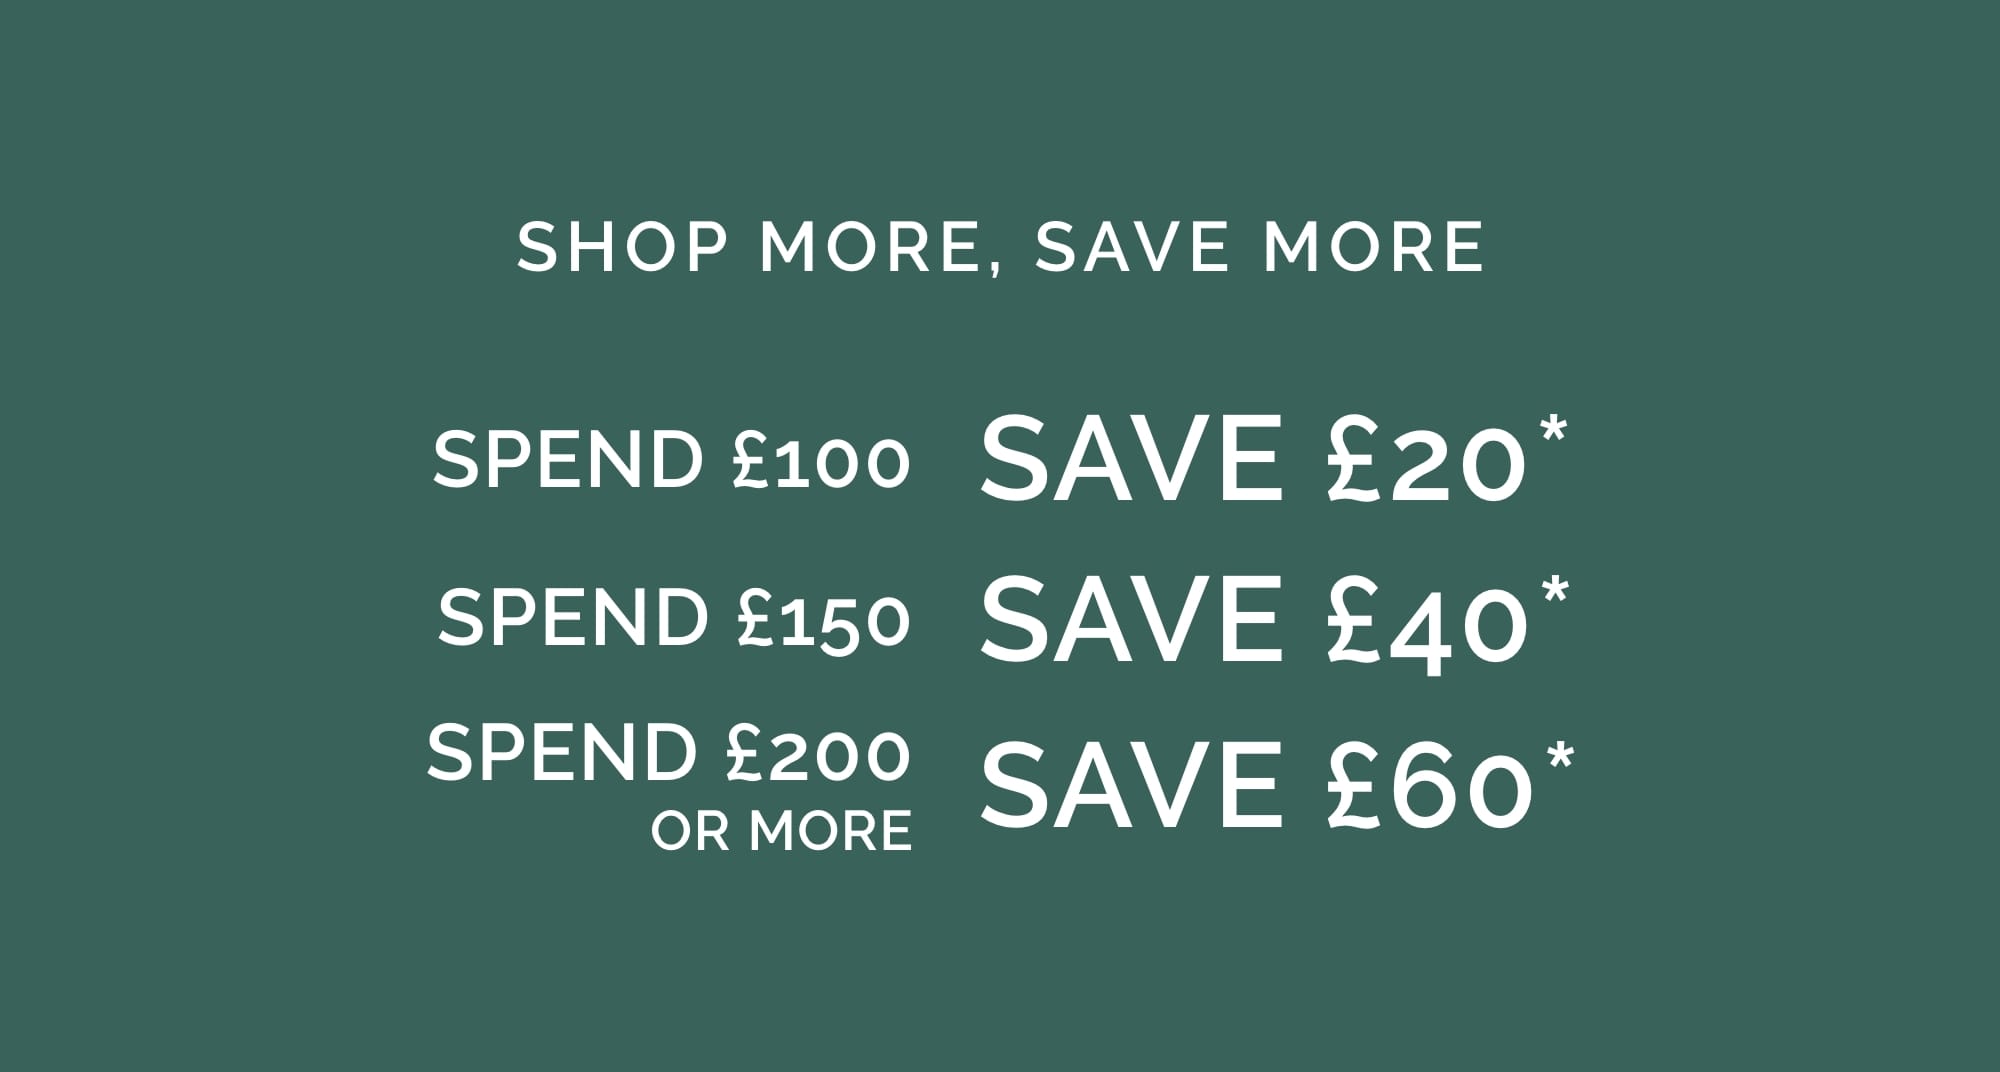 SHOP MORE, SAVE MORE Spend £100, Save £20* Spend £150, Save £40* Spend £200 or more, Save £60*